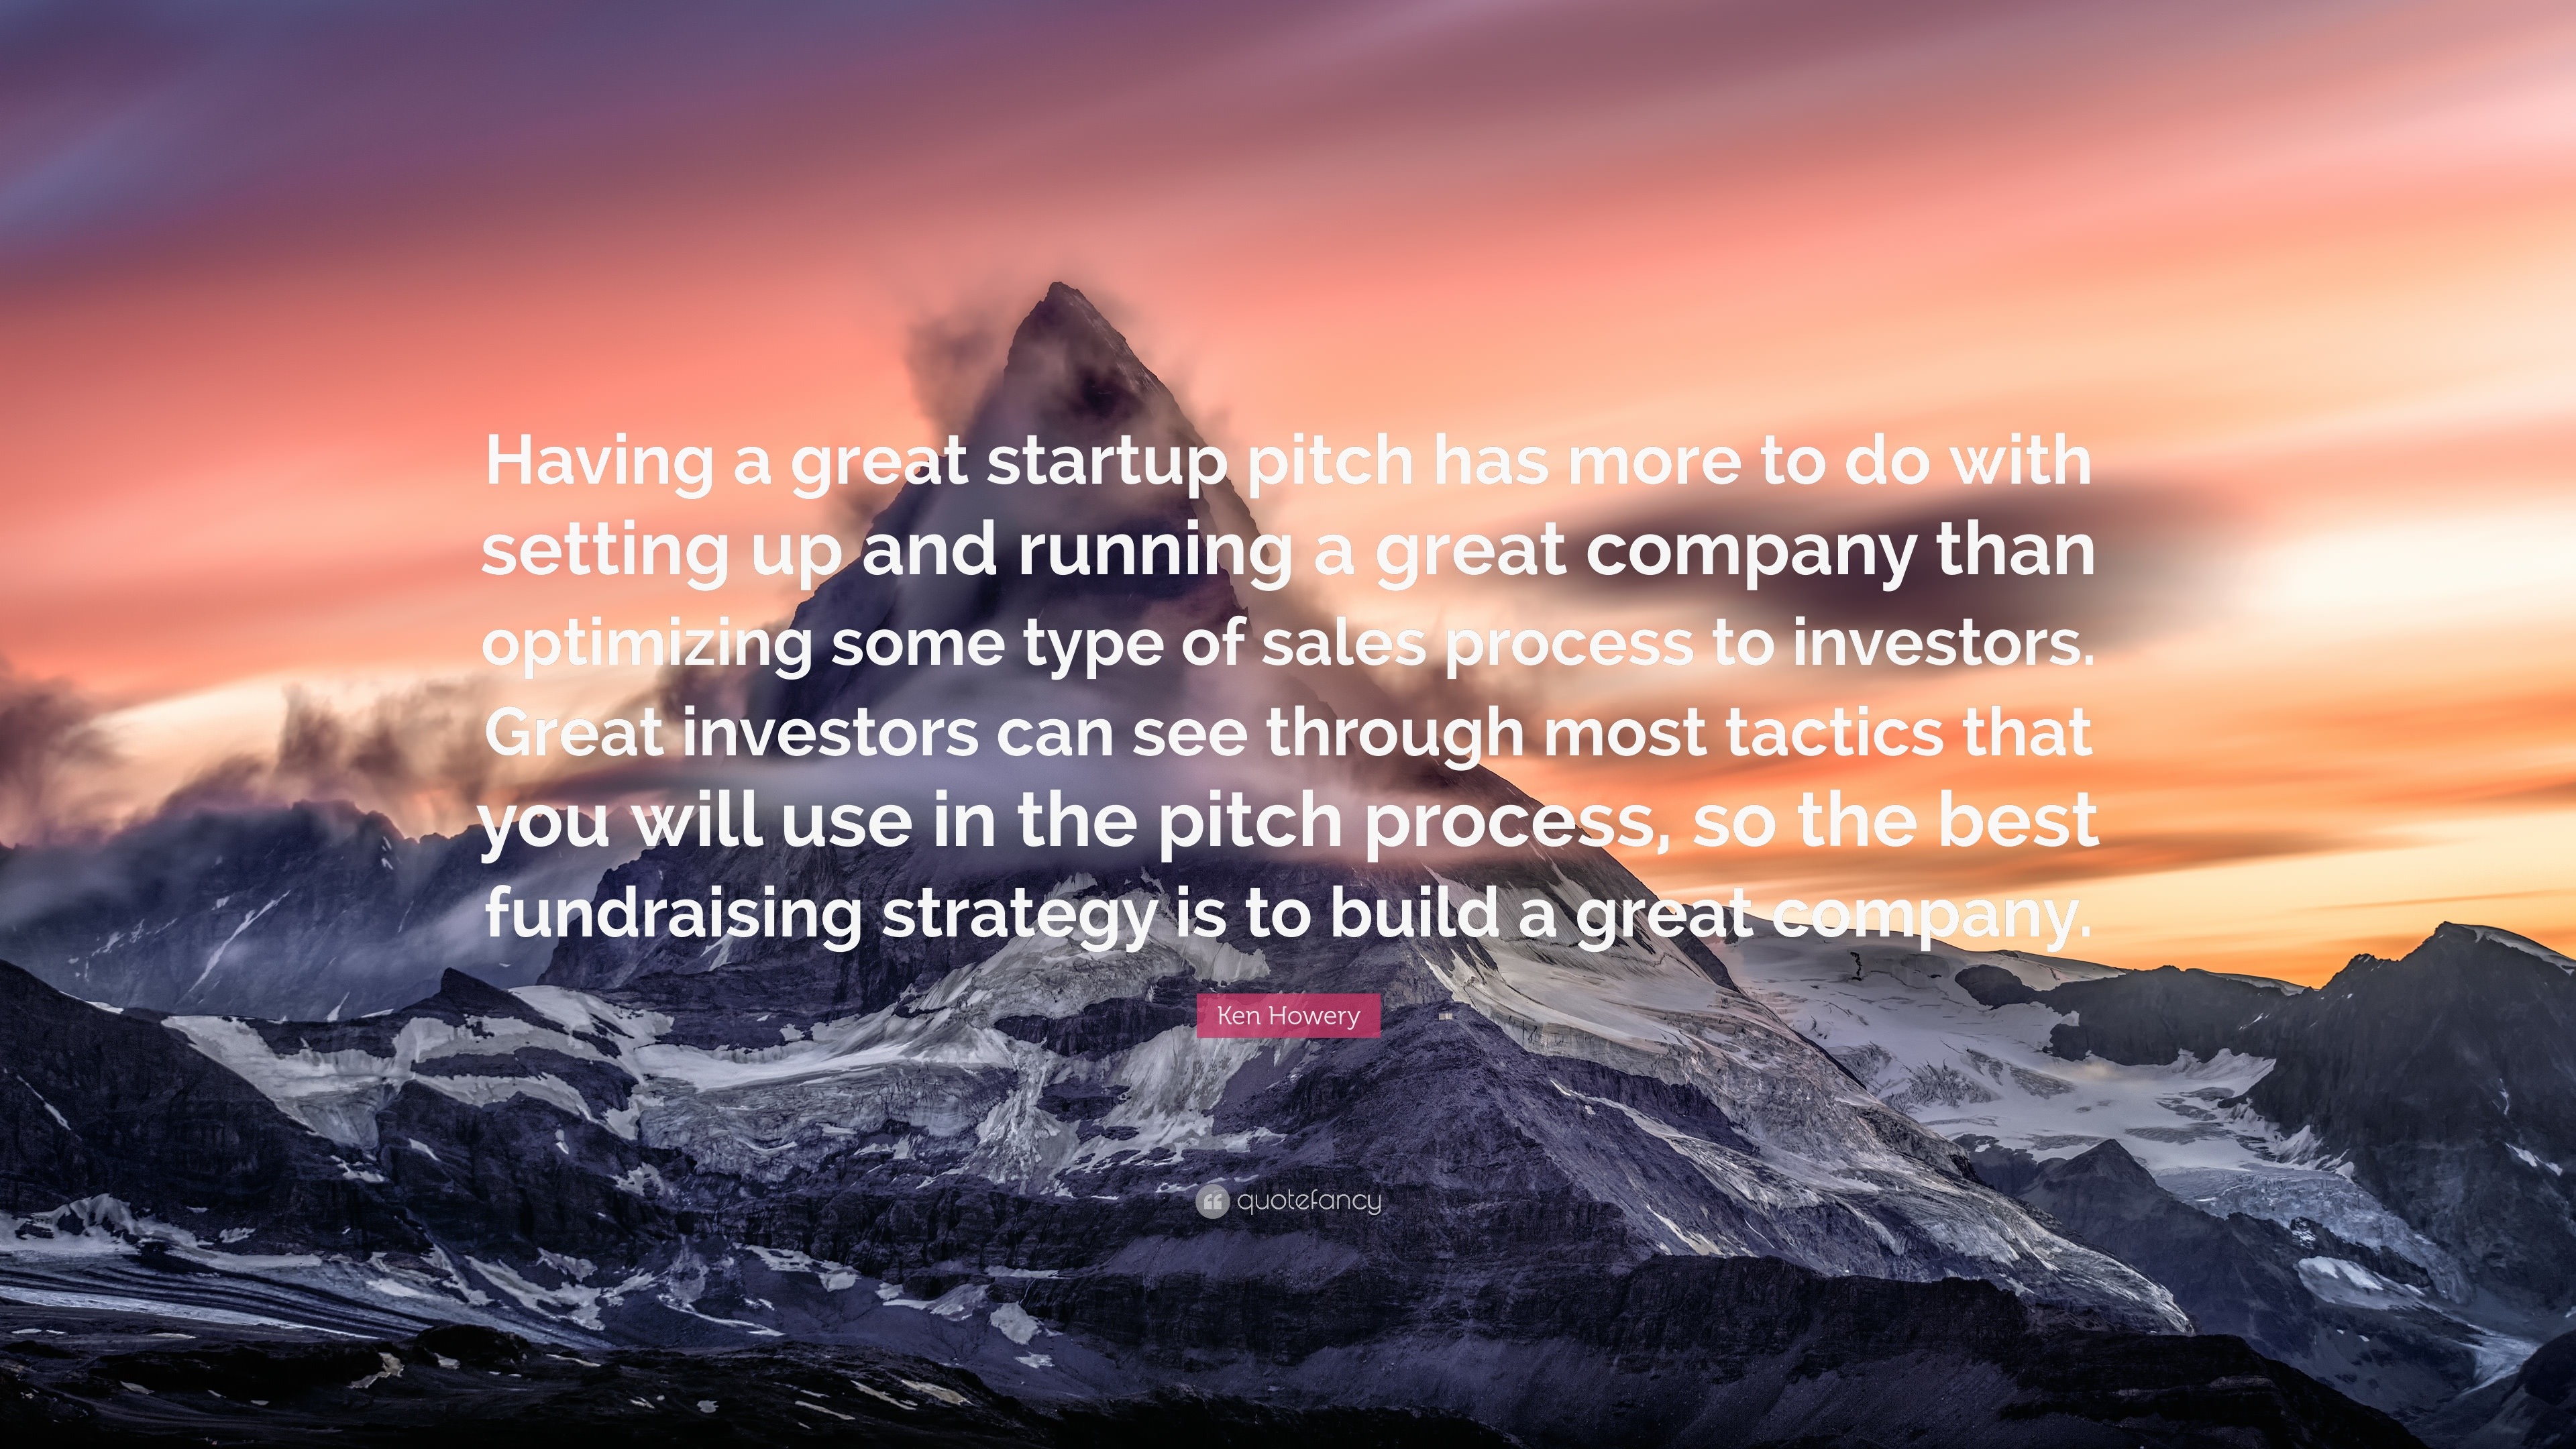 Ken Howery Quote: “Having a great startup pitch has more to do with ...